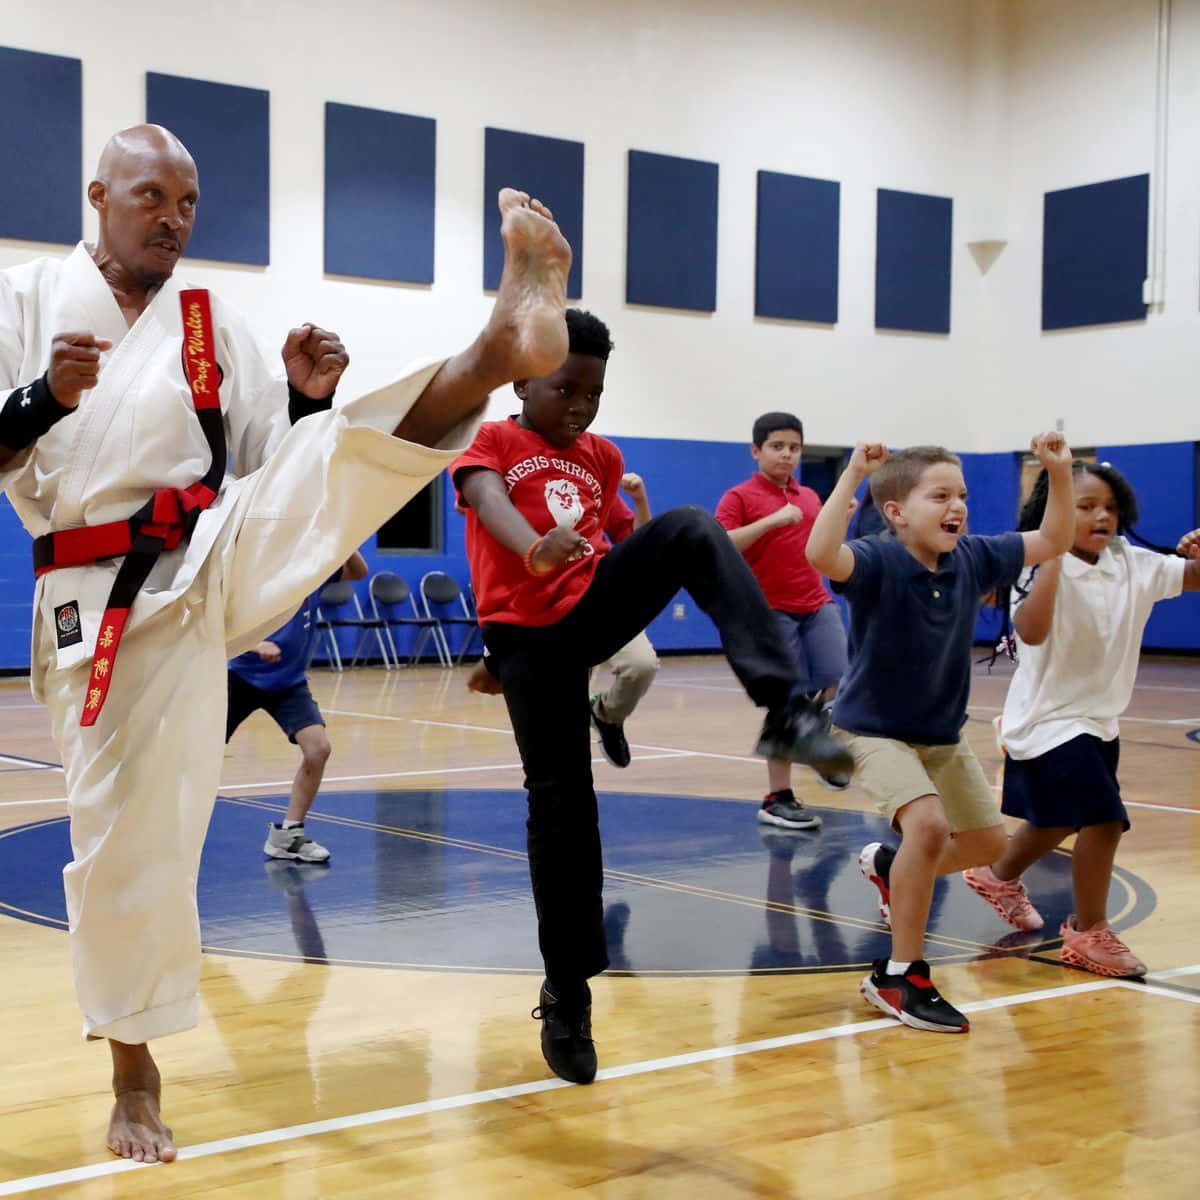 Karate Pictures